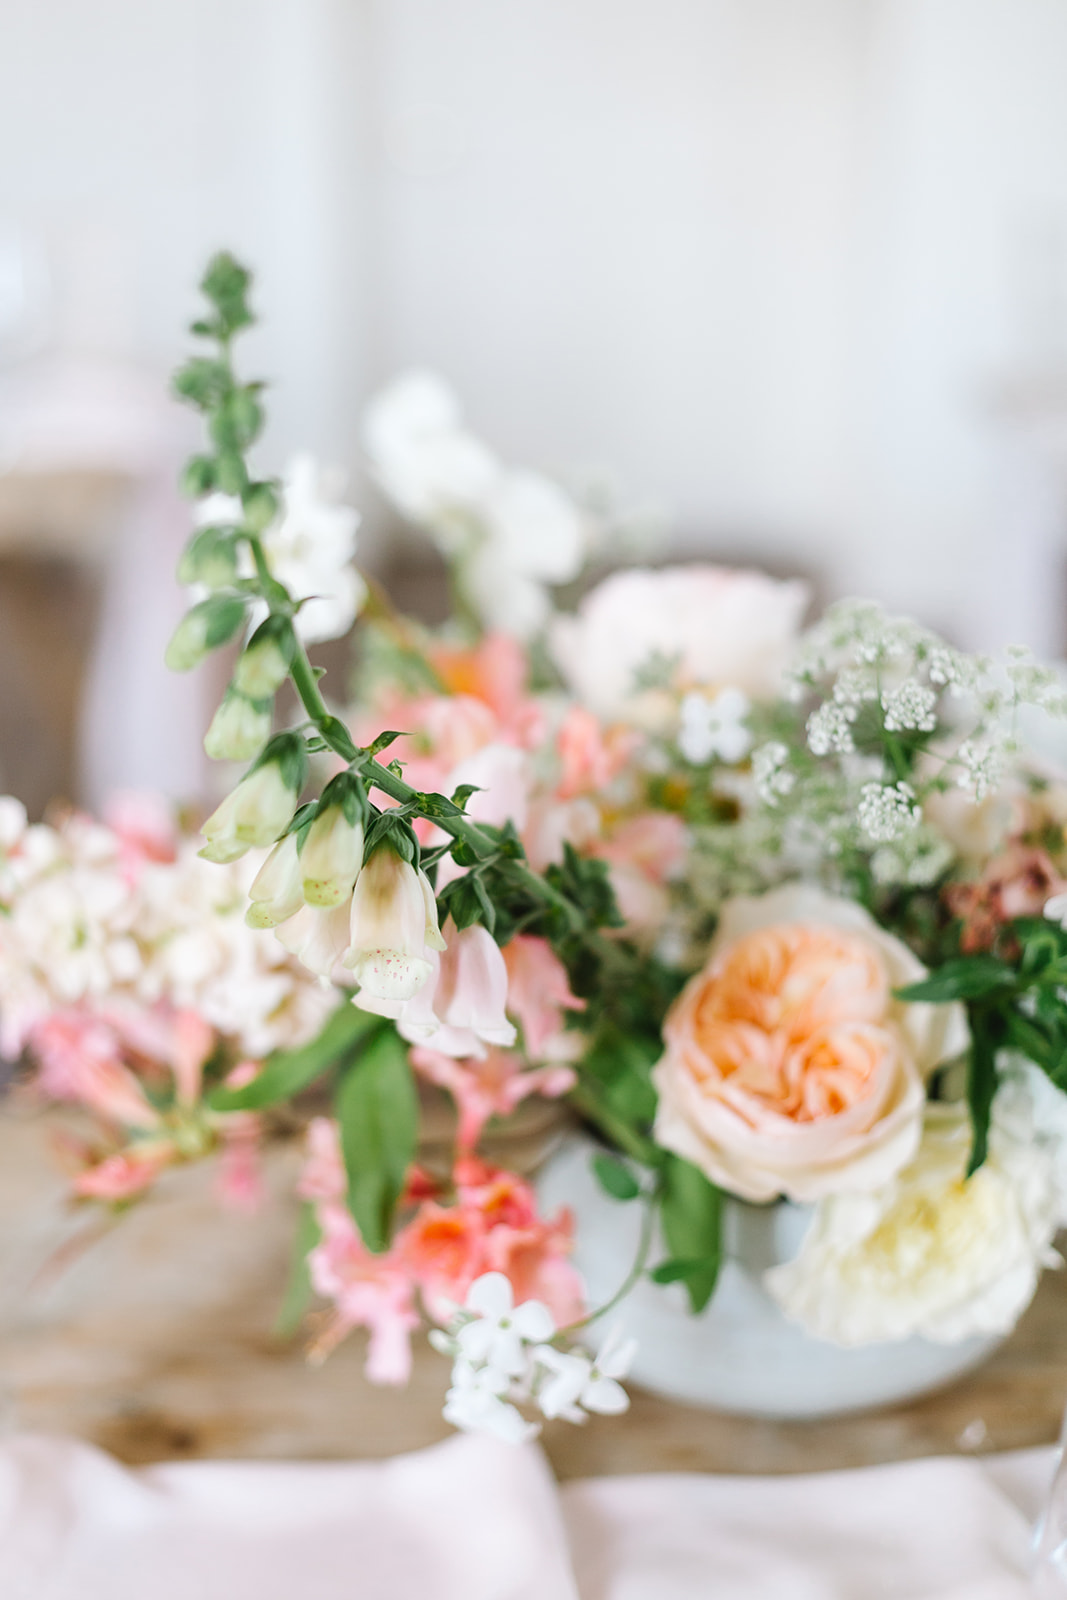 May flowers for wedding breakfasts